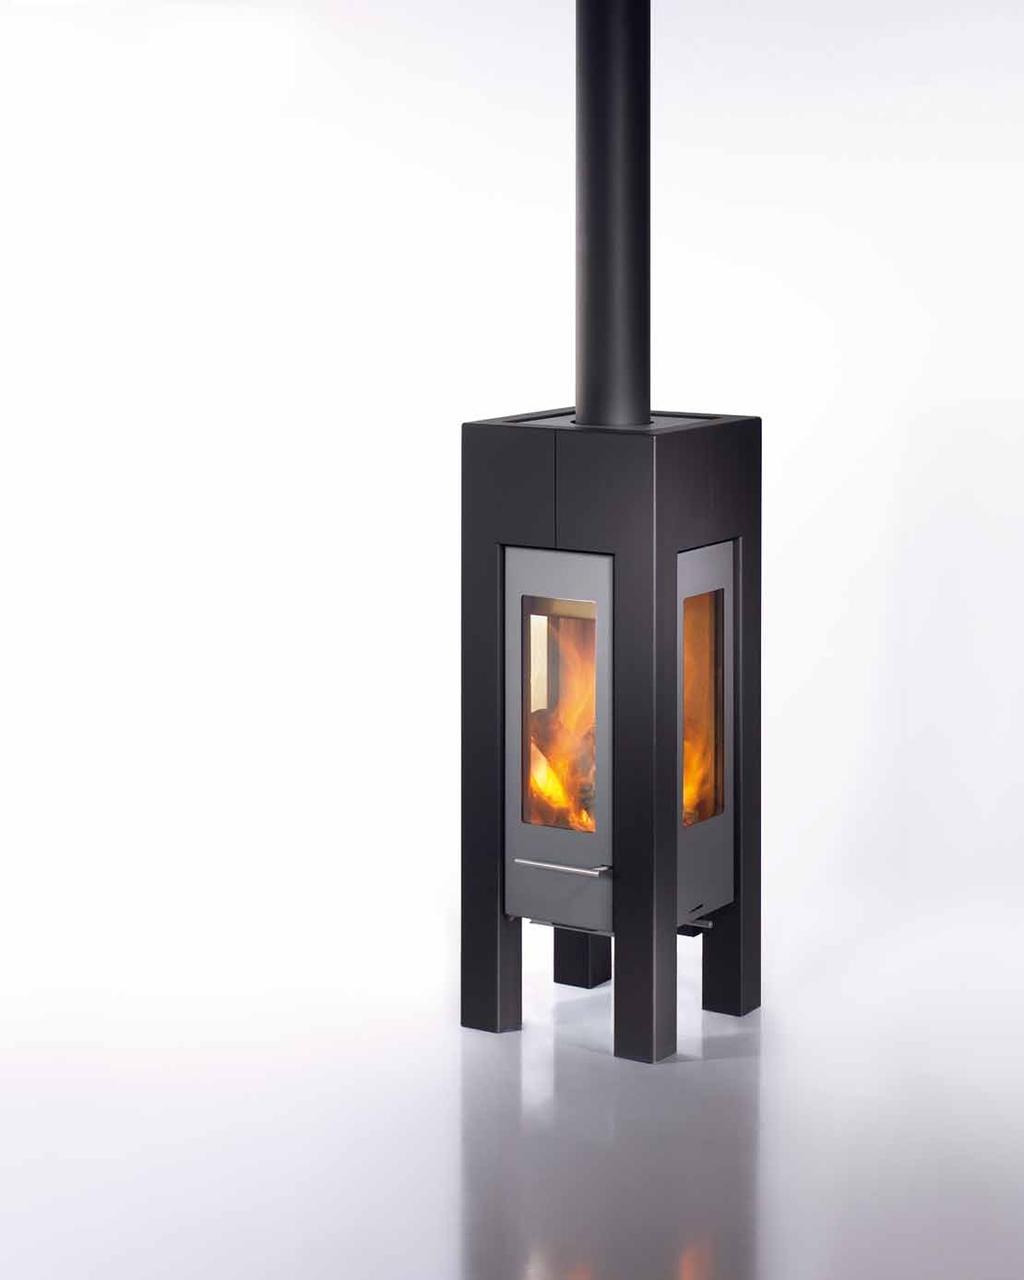 Modena With its streamlined form and balanced proportions the Modena fire glows from three sides. The best view of the flames is from any direction.